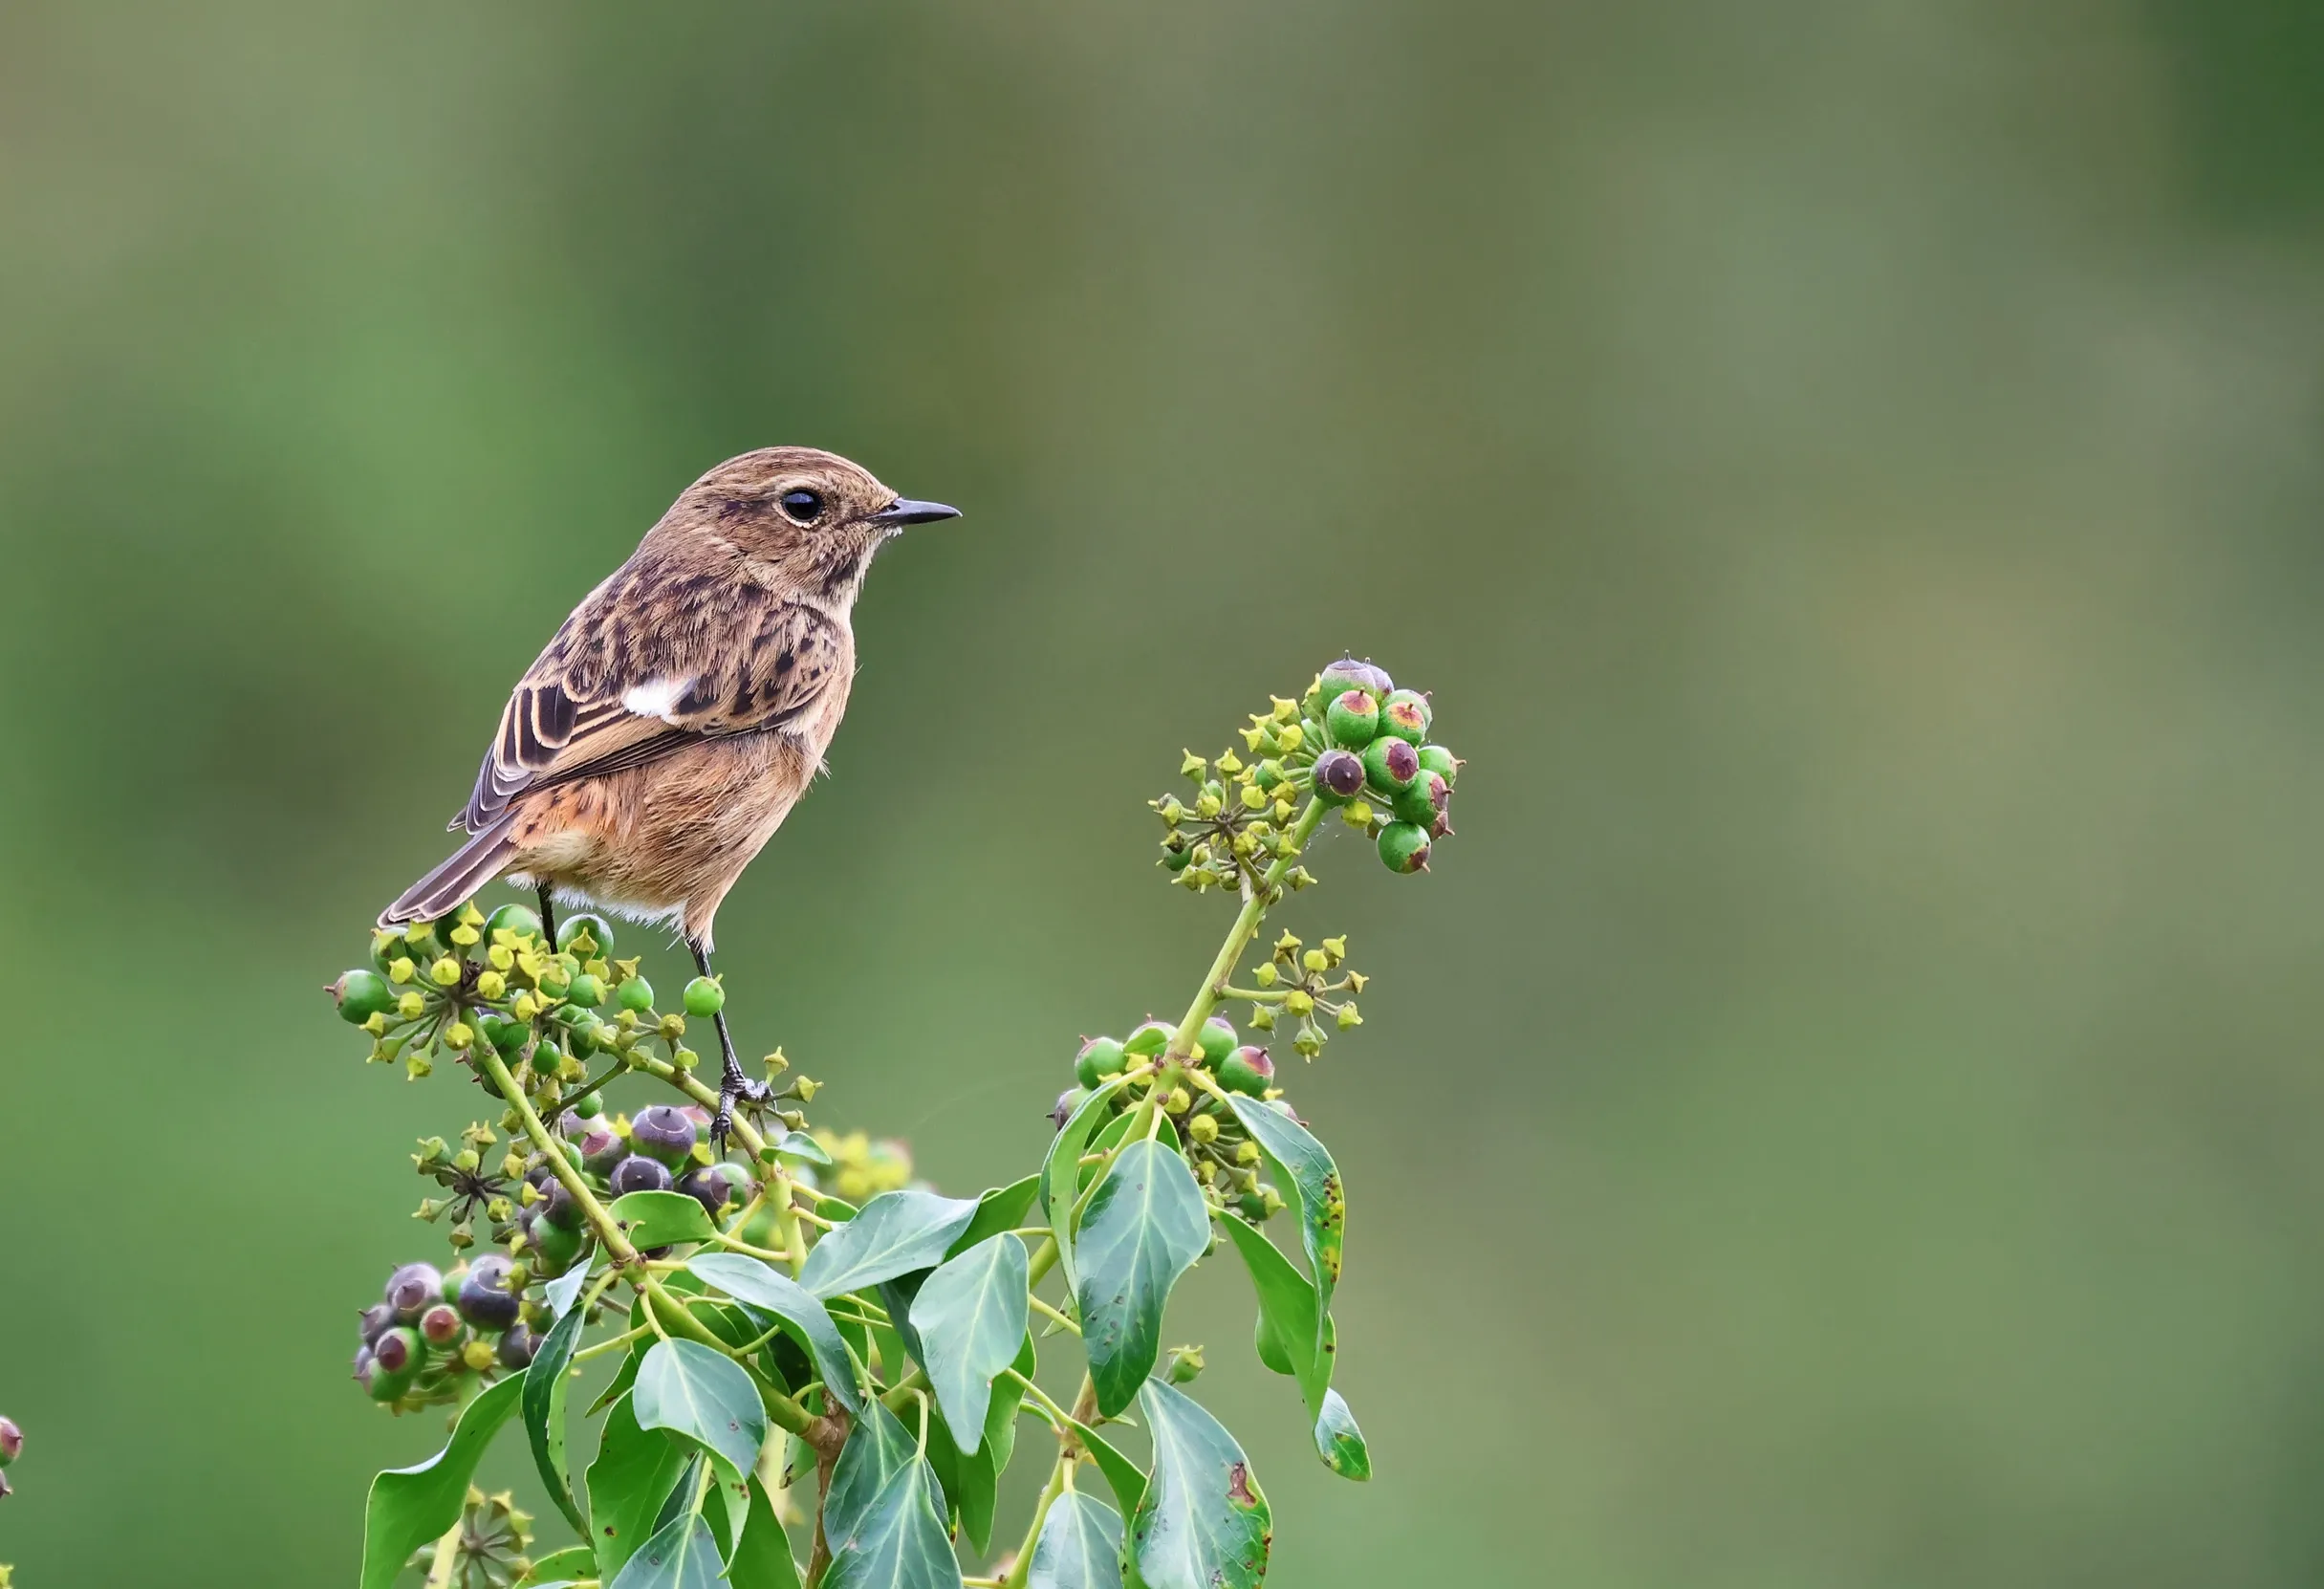 Lone female Stonechat stood on a branch filled with leaves.